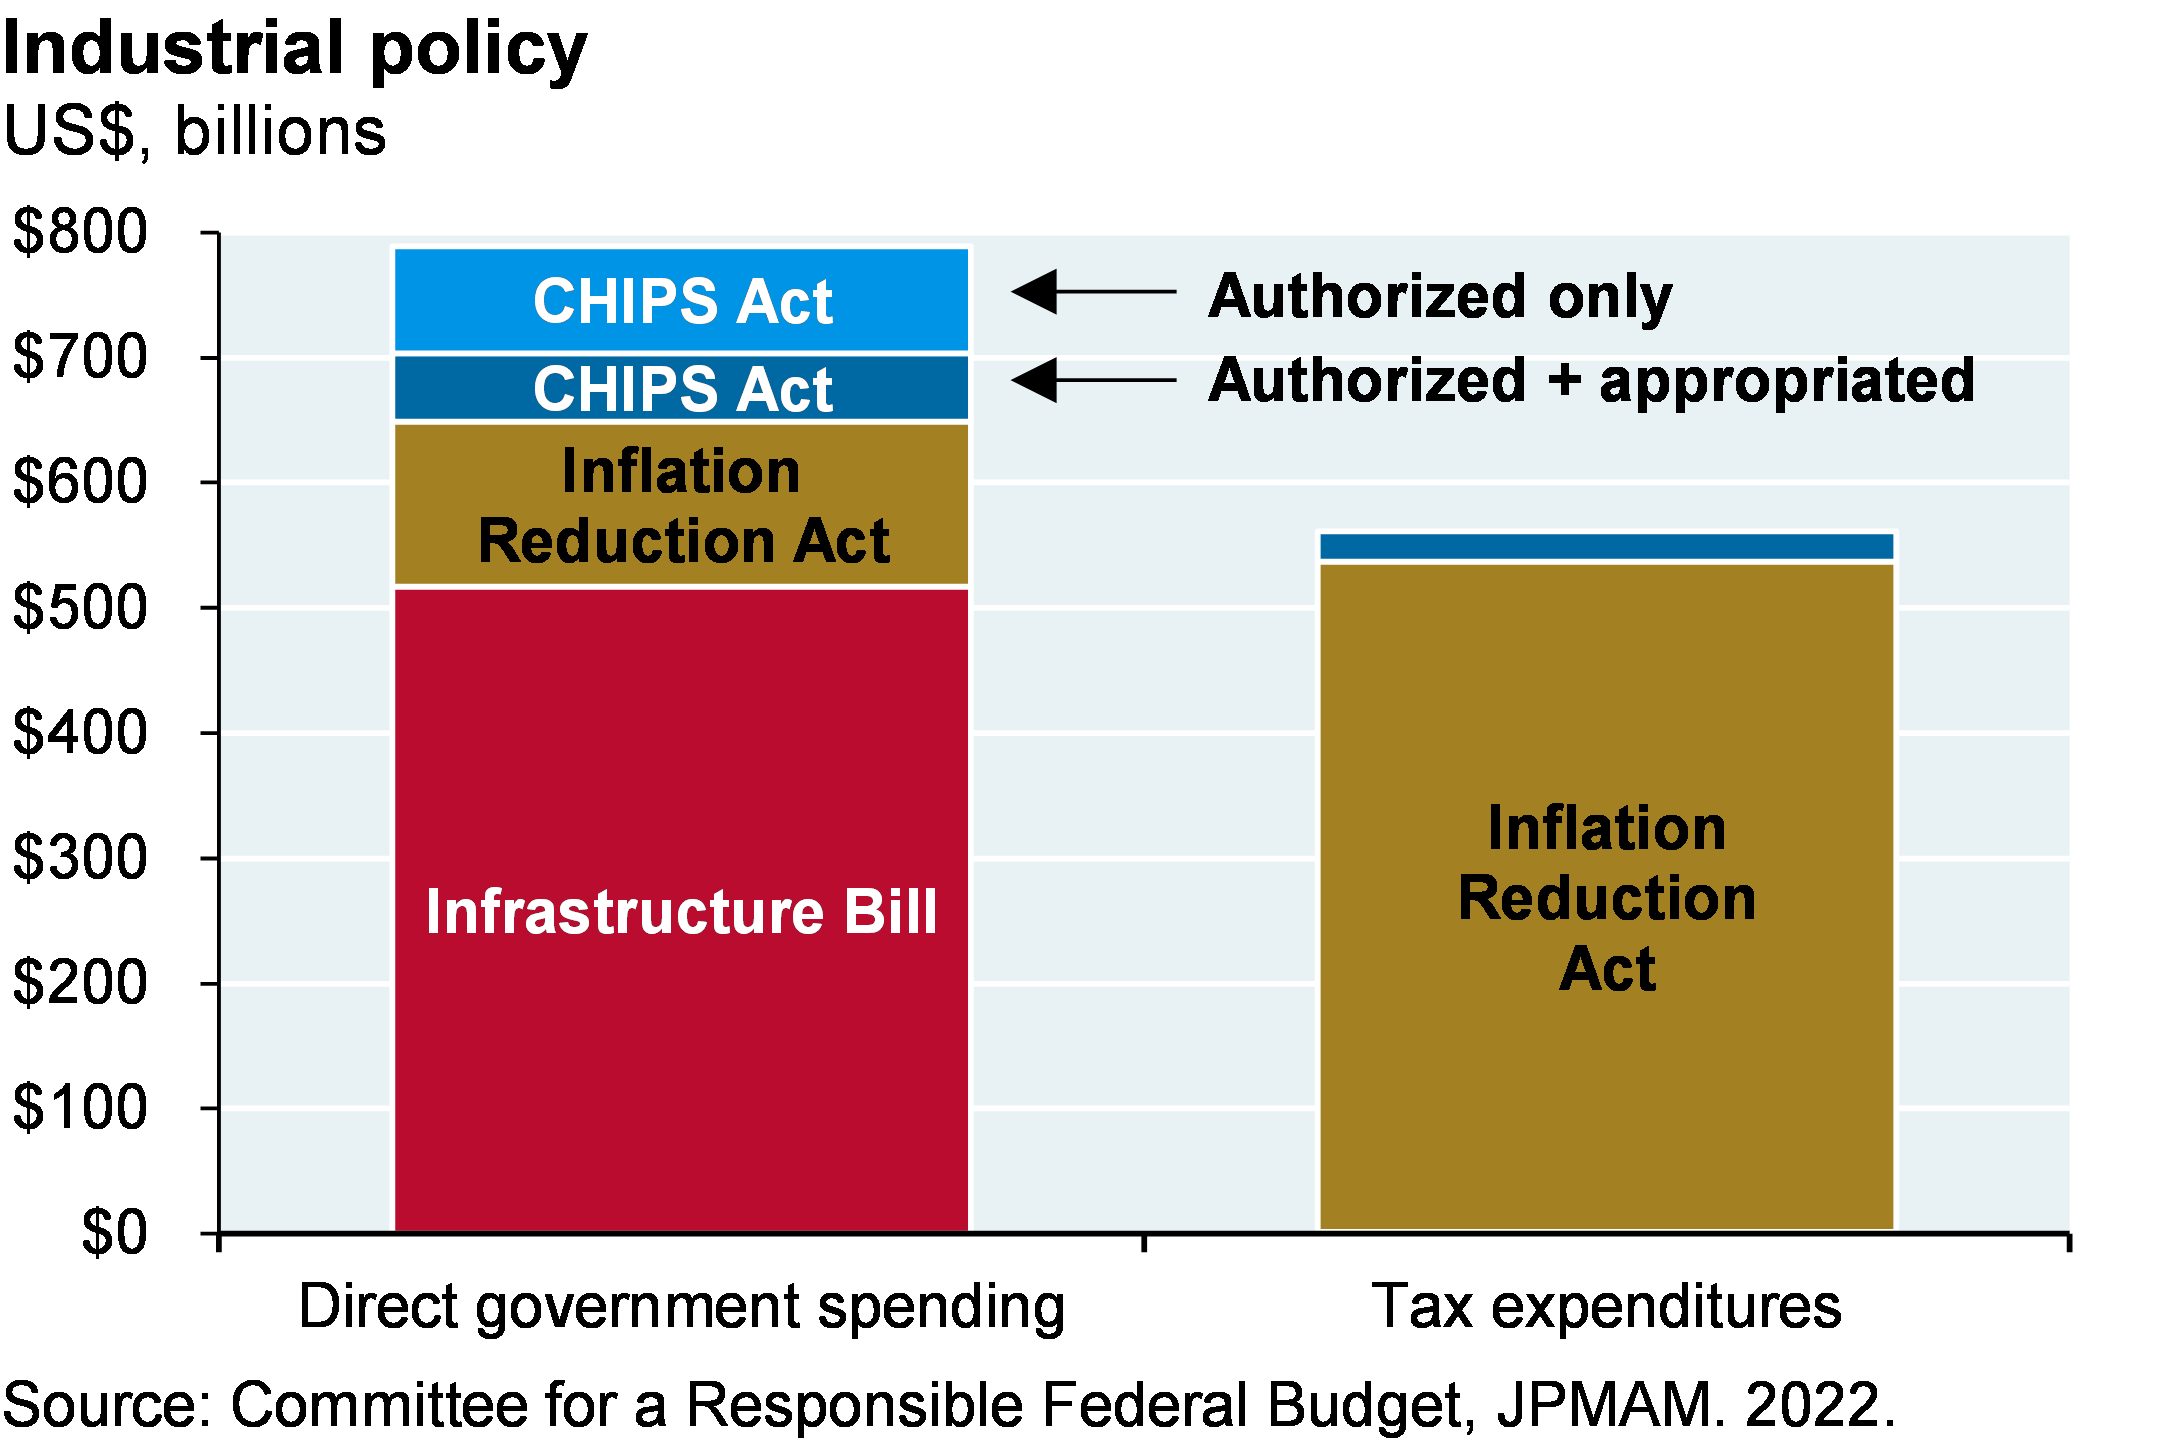 Bar chart shows the total amount of direct government spending and tax expenditures for the CHIPS Act, IRA, and Infrastructure Bill. The bar chart shows the US government is set to spend ~$800 billion on industrial policy, and an additional ~$500 billion in tax expenditures. 